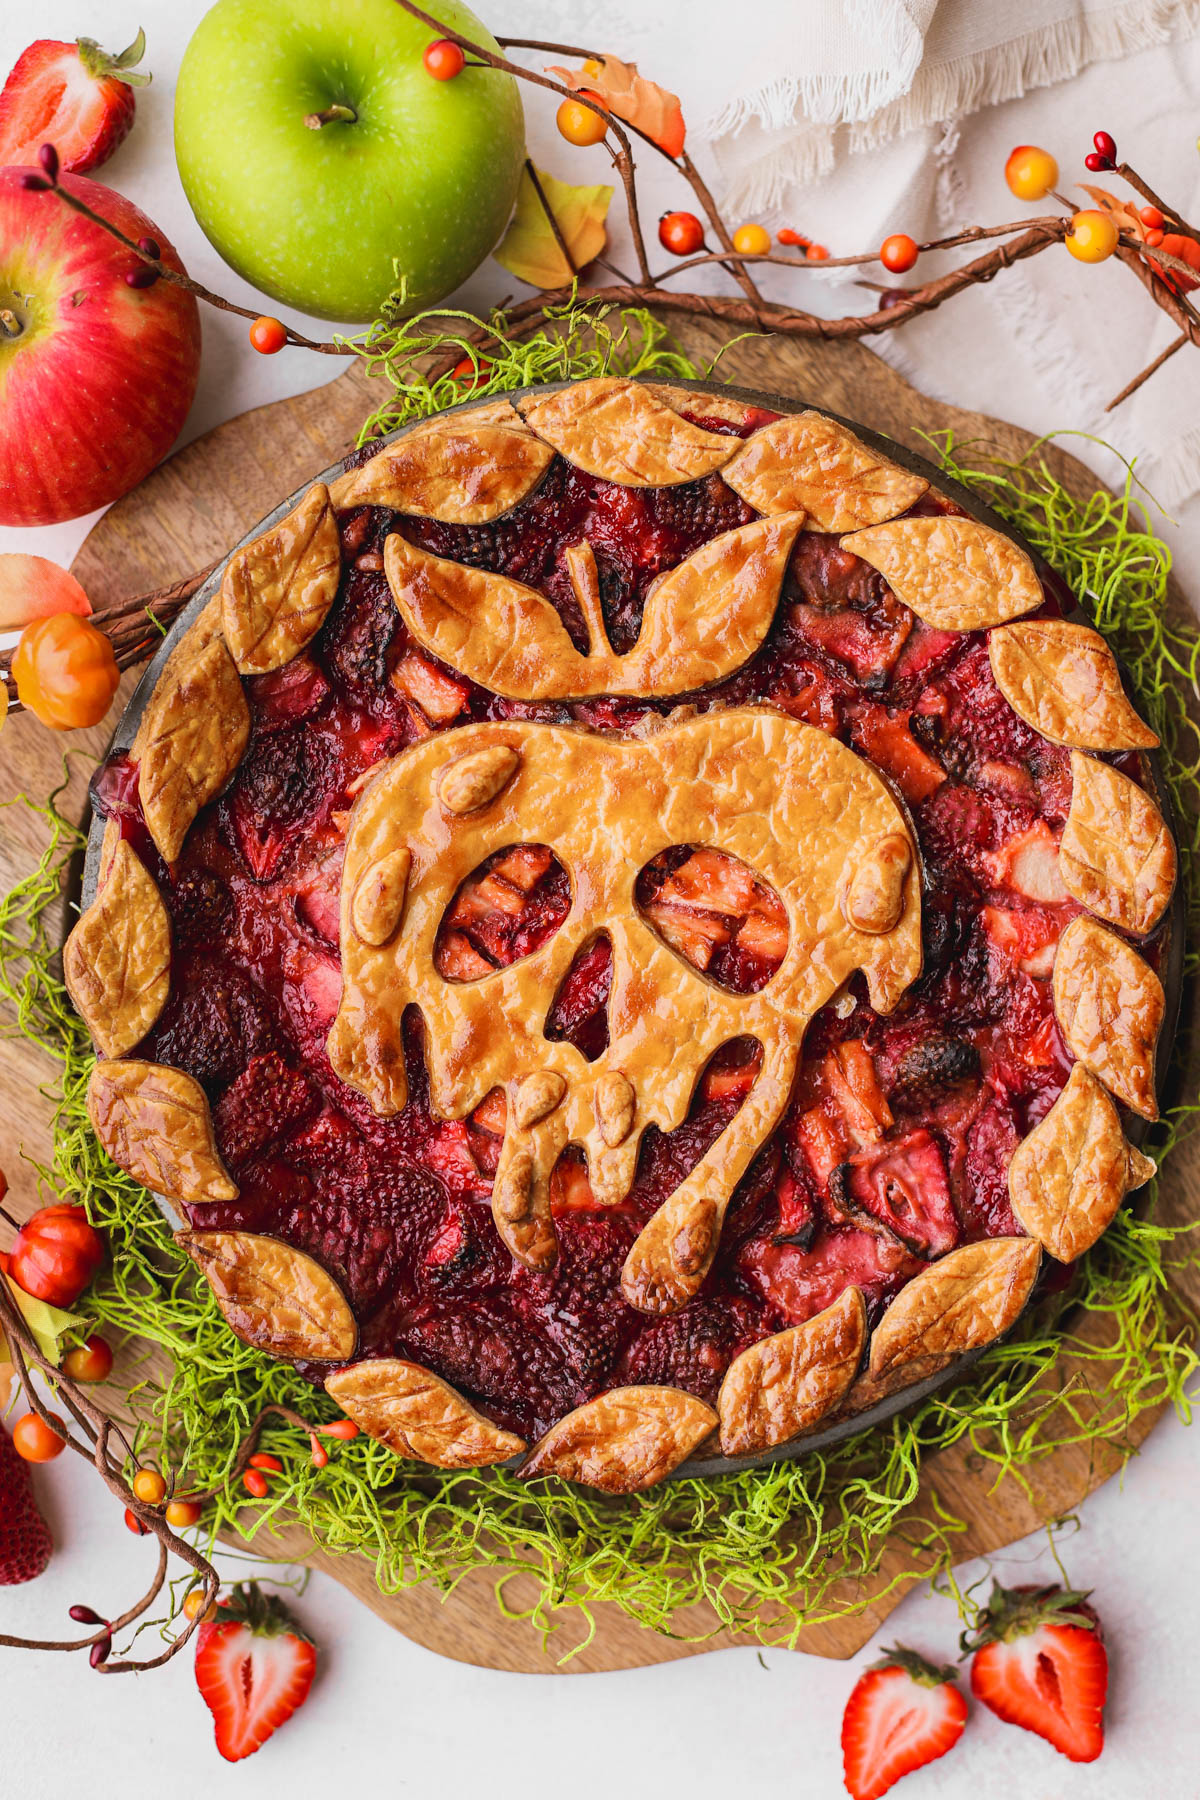 Strawberry apple pie inspired by Disney's Poison Apple.  Made with fresh strawberries, apples and baked inside a buttery, flaky crust.  